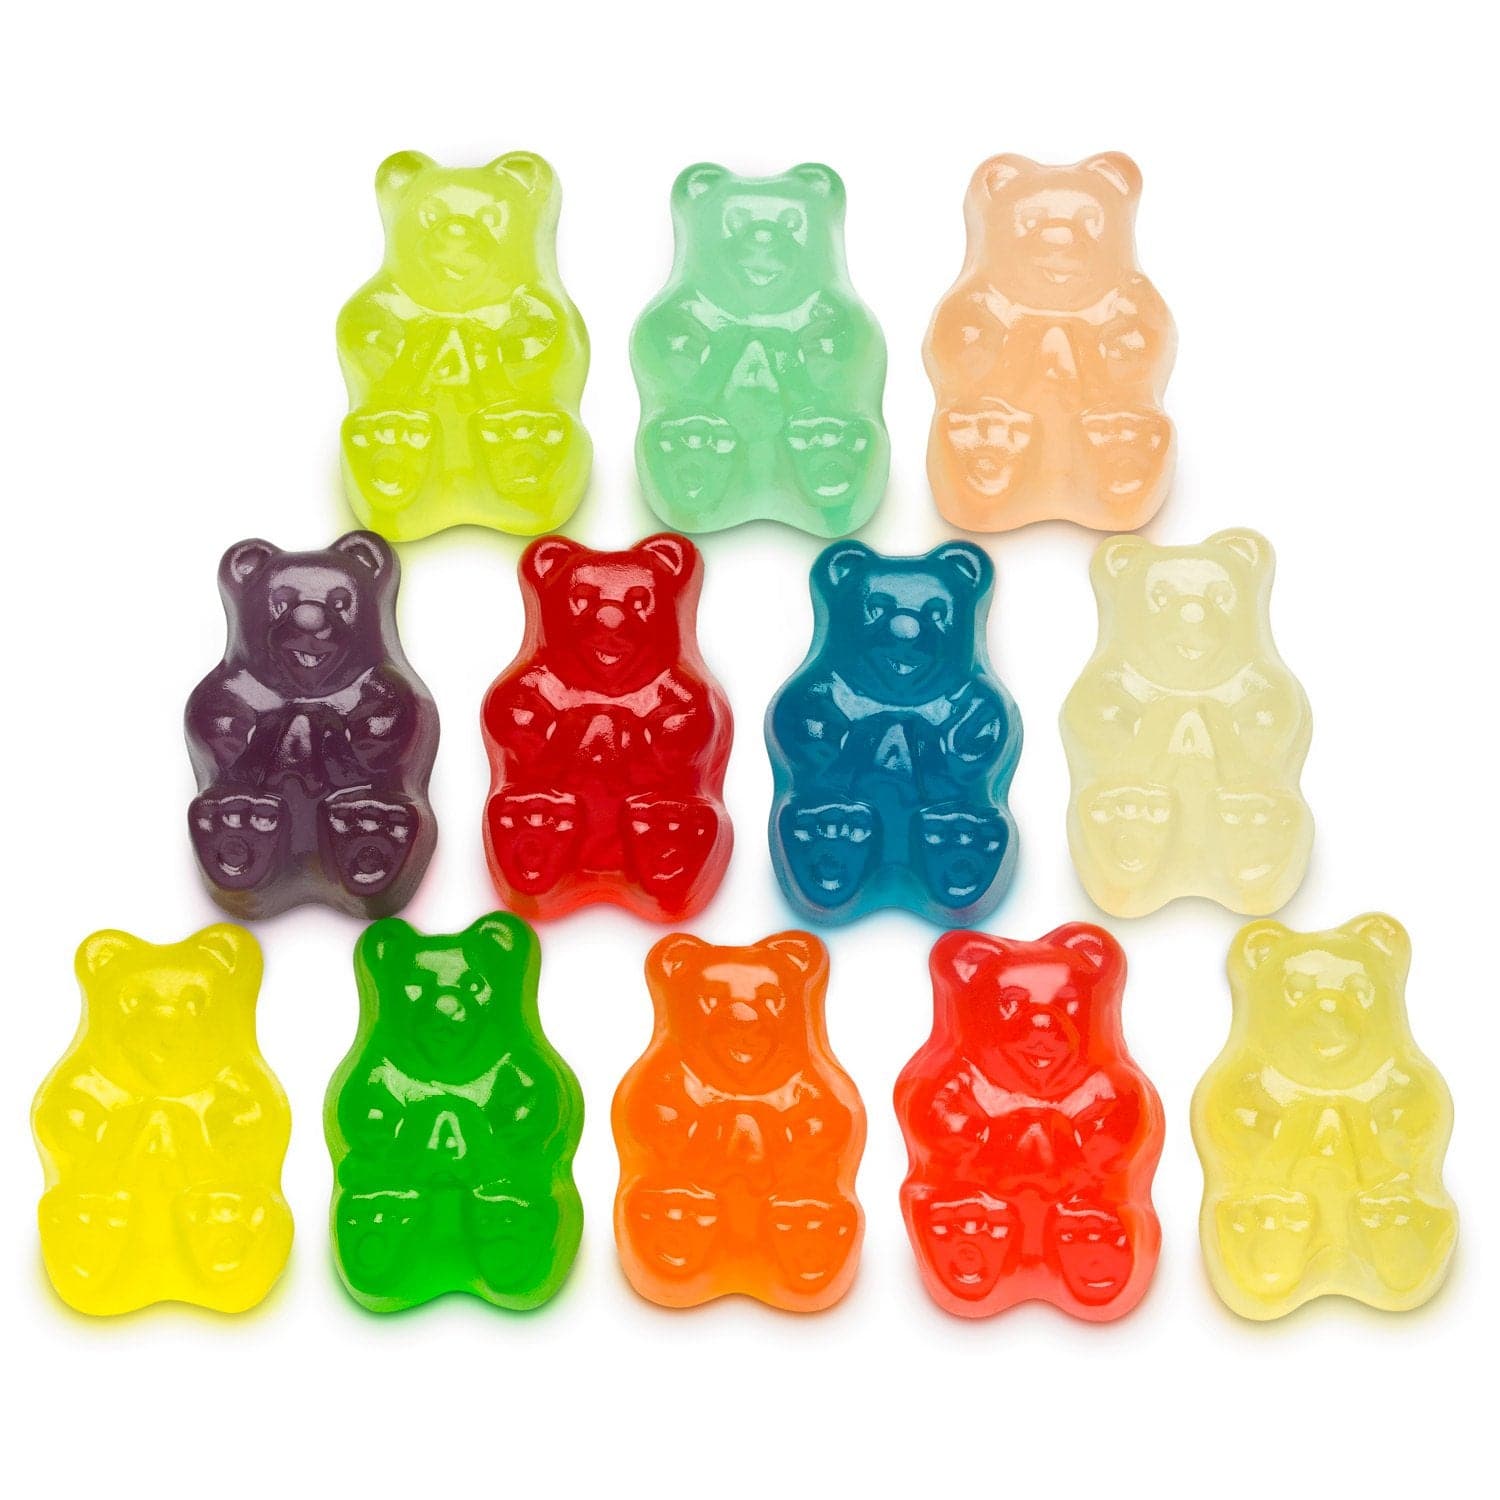 Albanese Confectionery-12 Flavor Gummi Bears 27 oz. Share Size Bag-53465-Legacy Toys